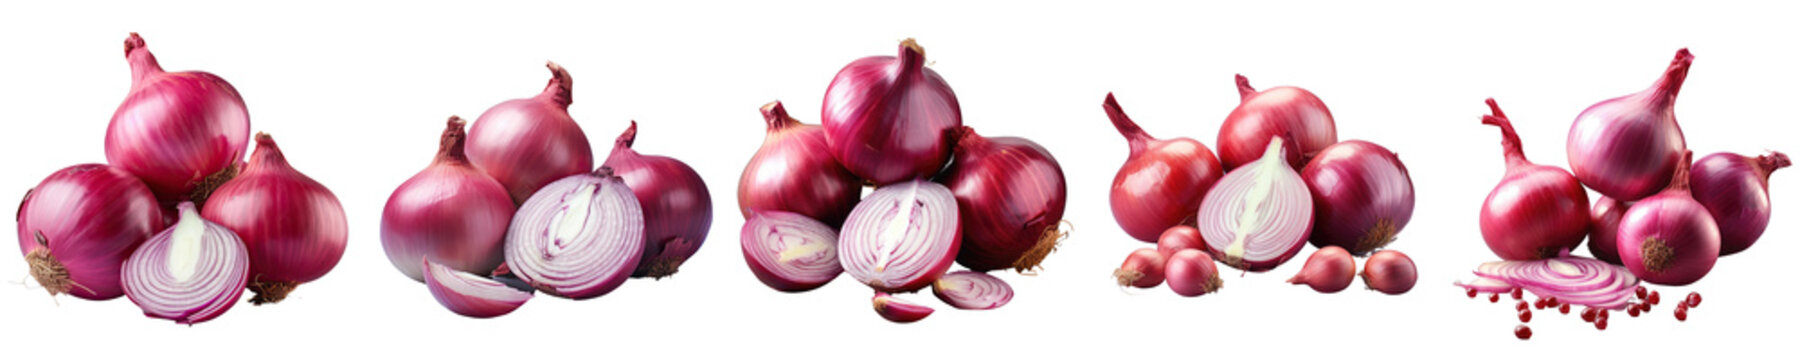 Png Set Heap of red onion whole and sliced isolated on transparent background